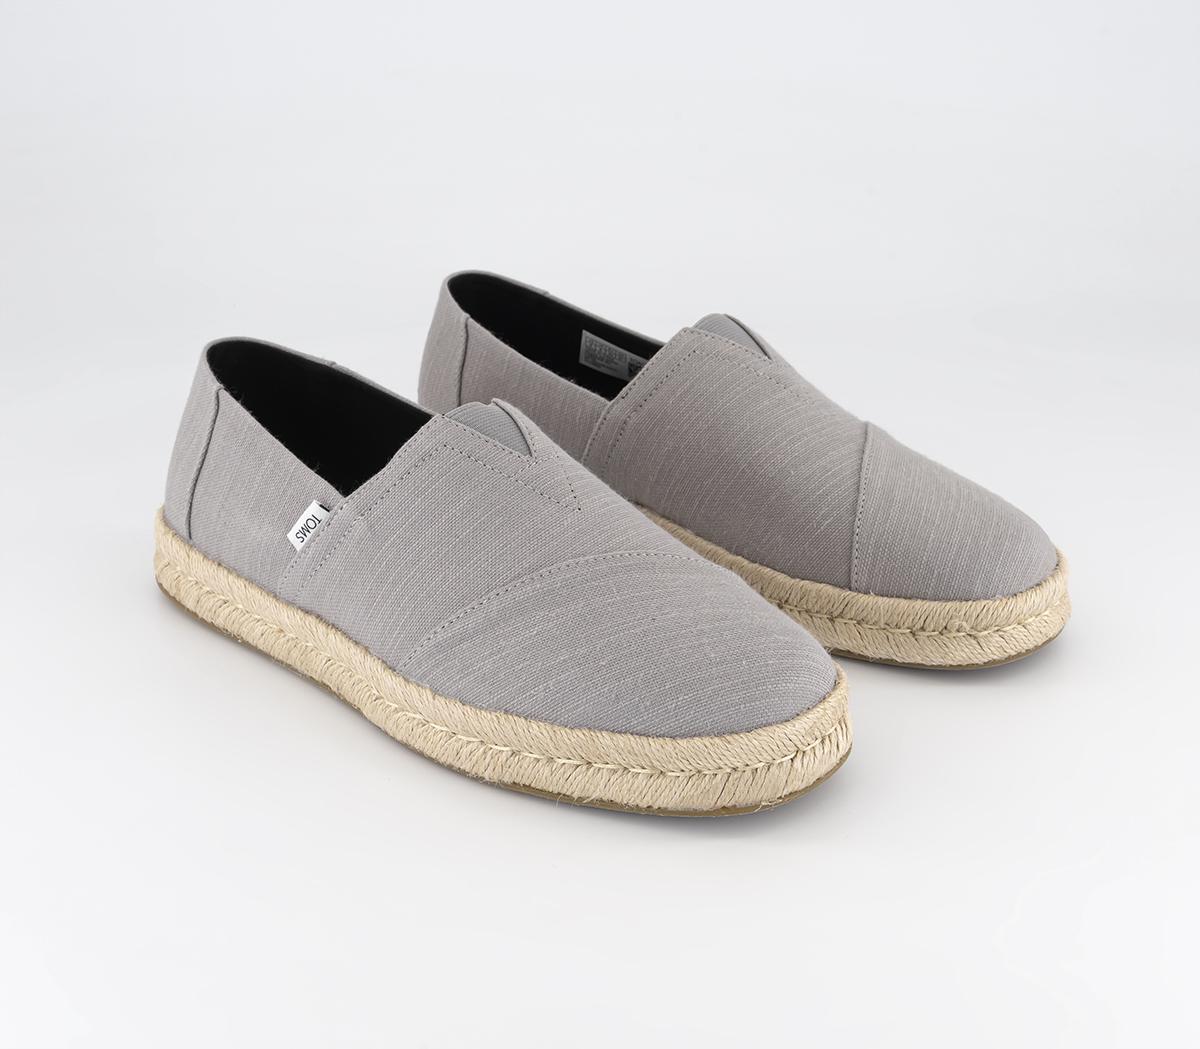 TOMS Mens Alpargata Rope 2.0 Slip Ons Drizzle Grey Recycled Cotton Slubby Woven, 12